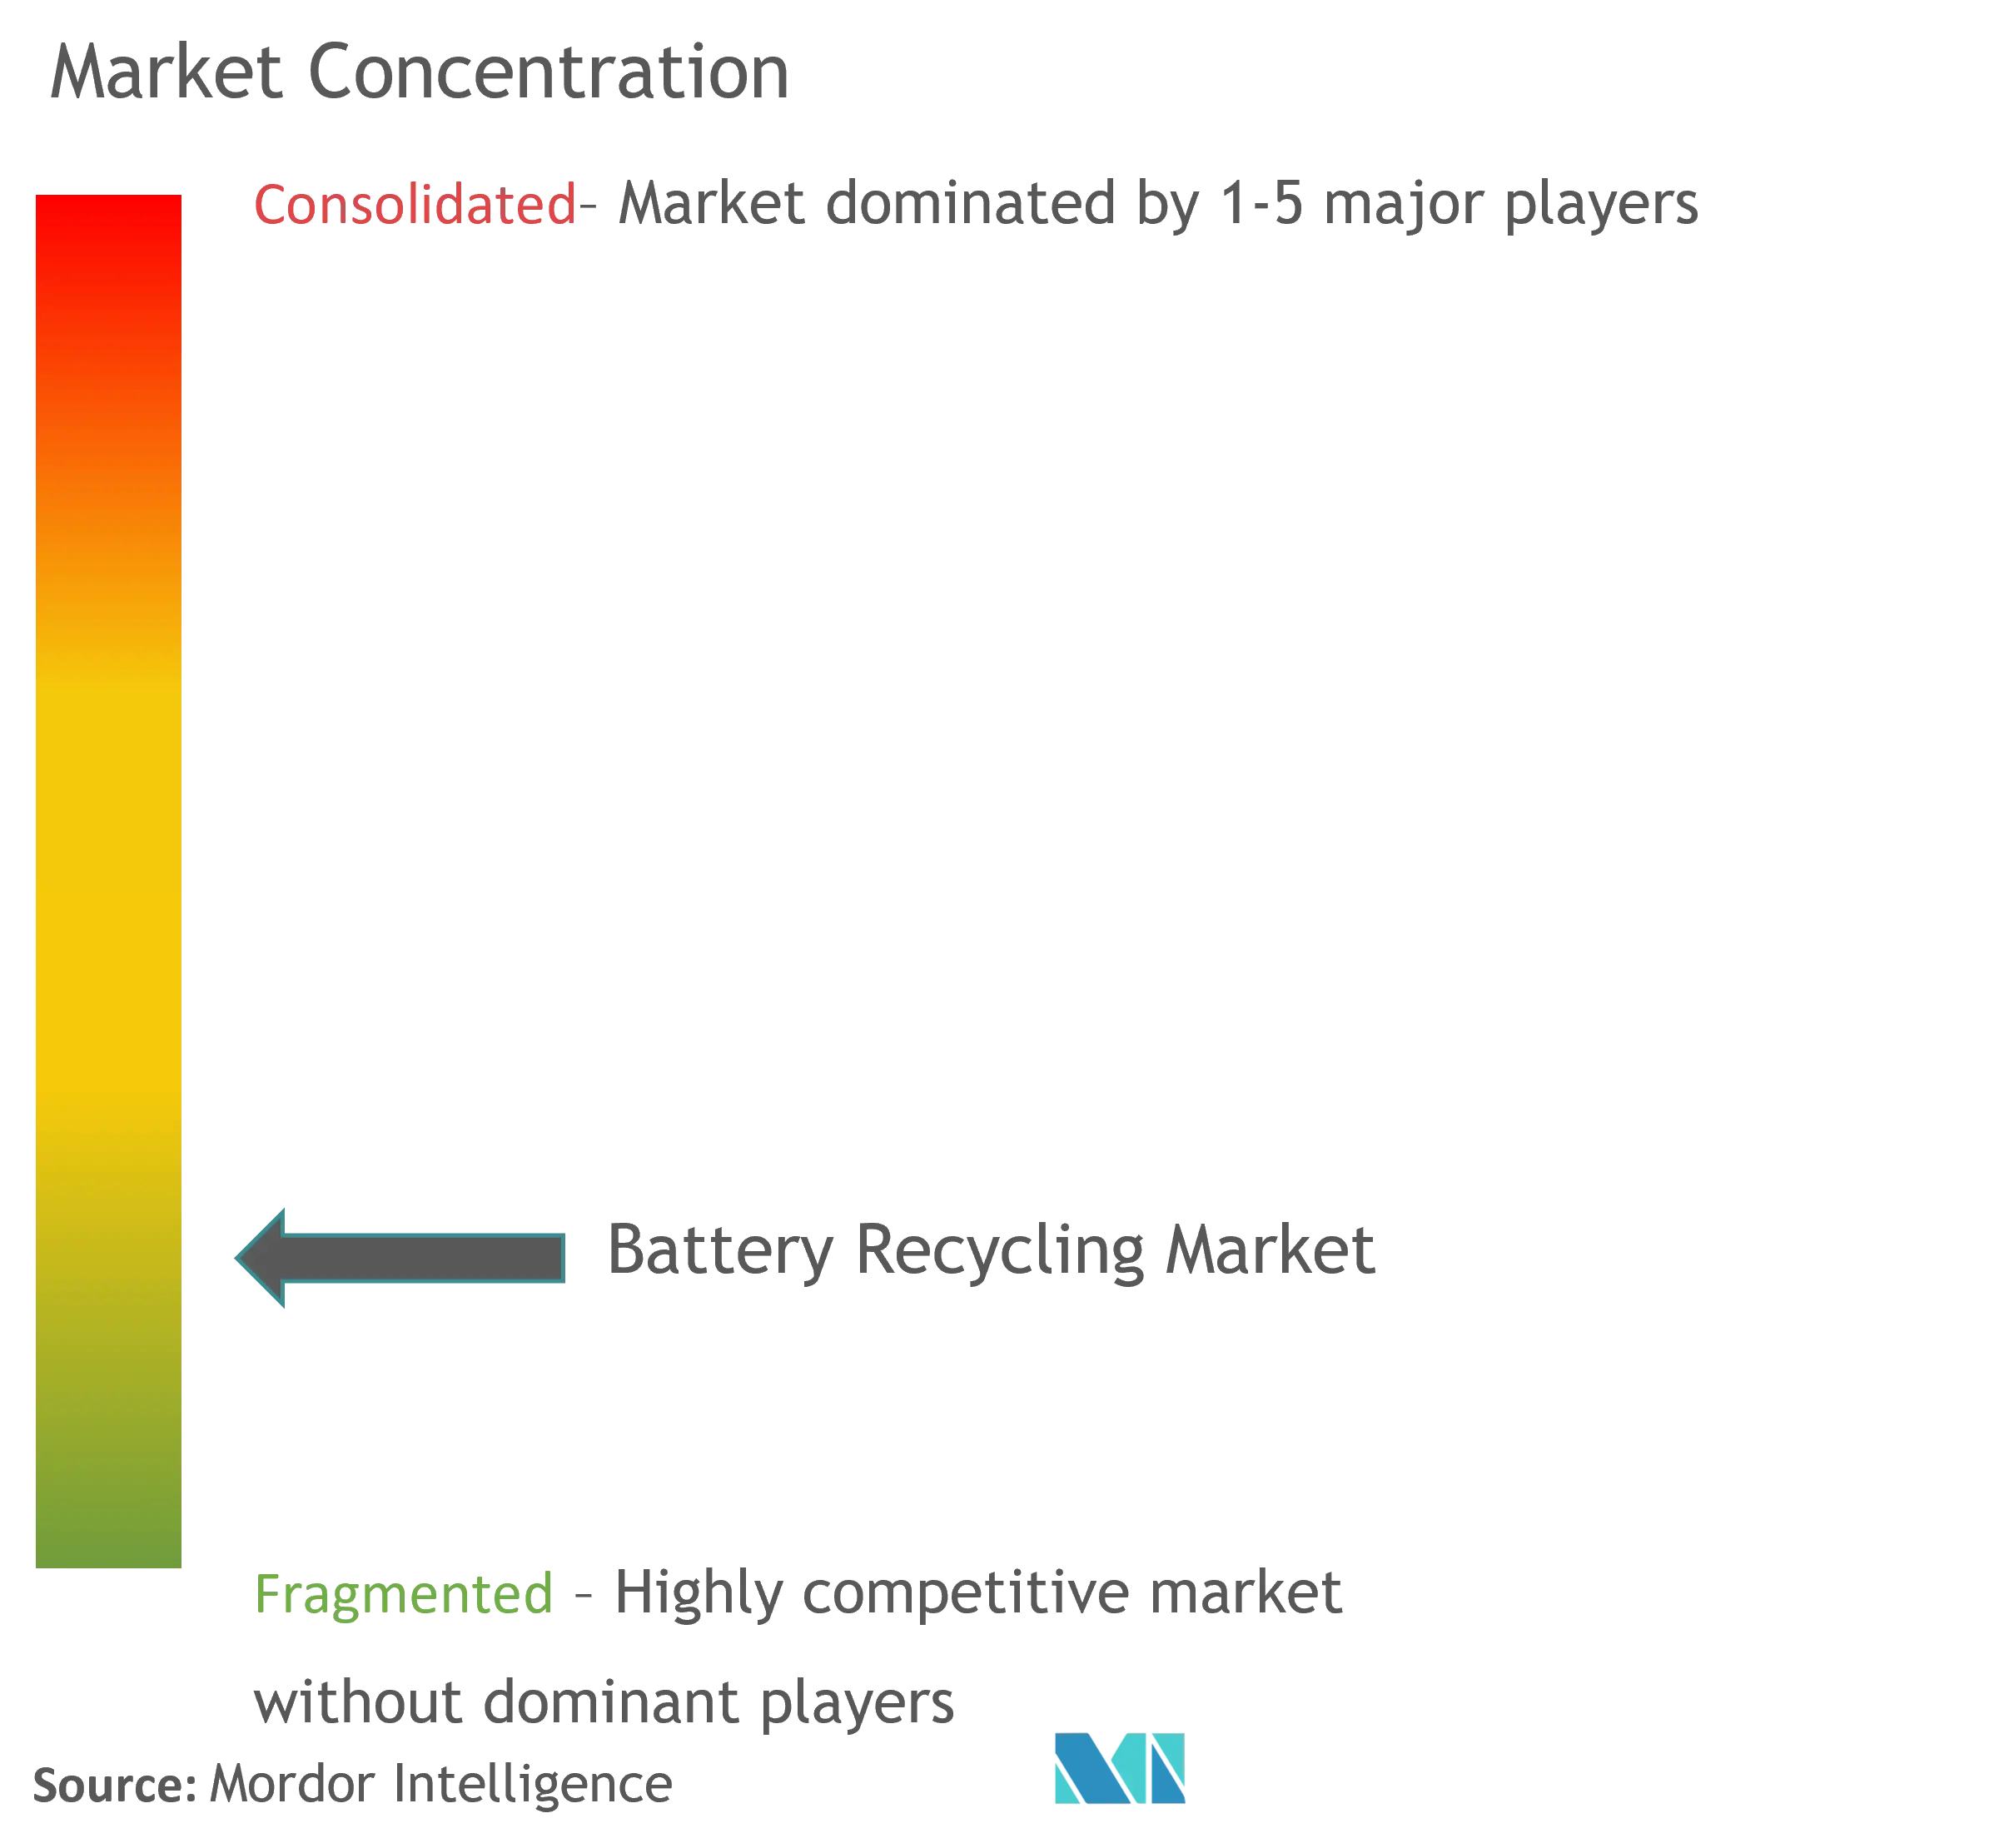 Battery Recycling Market Concentration